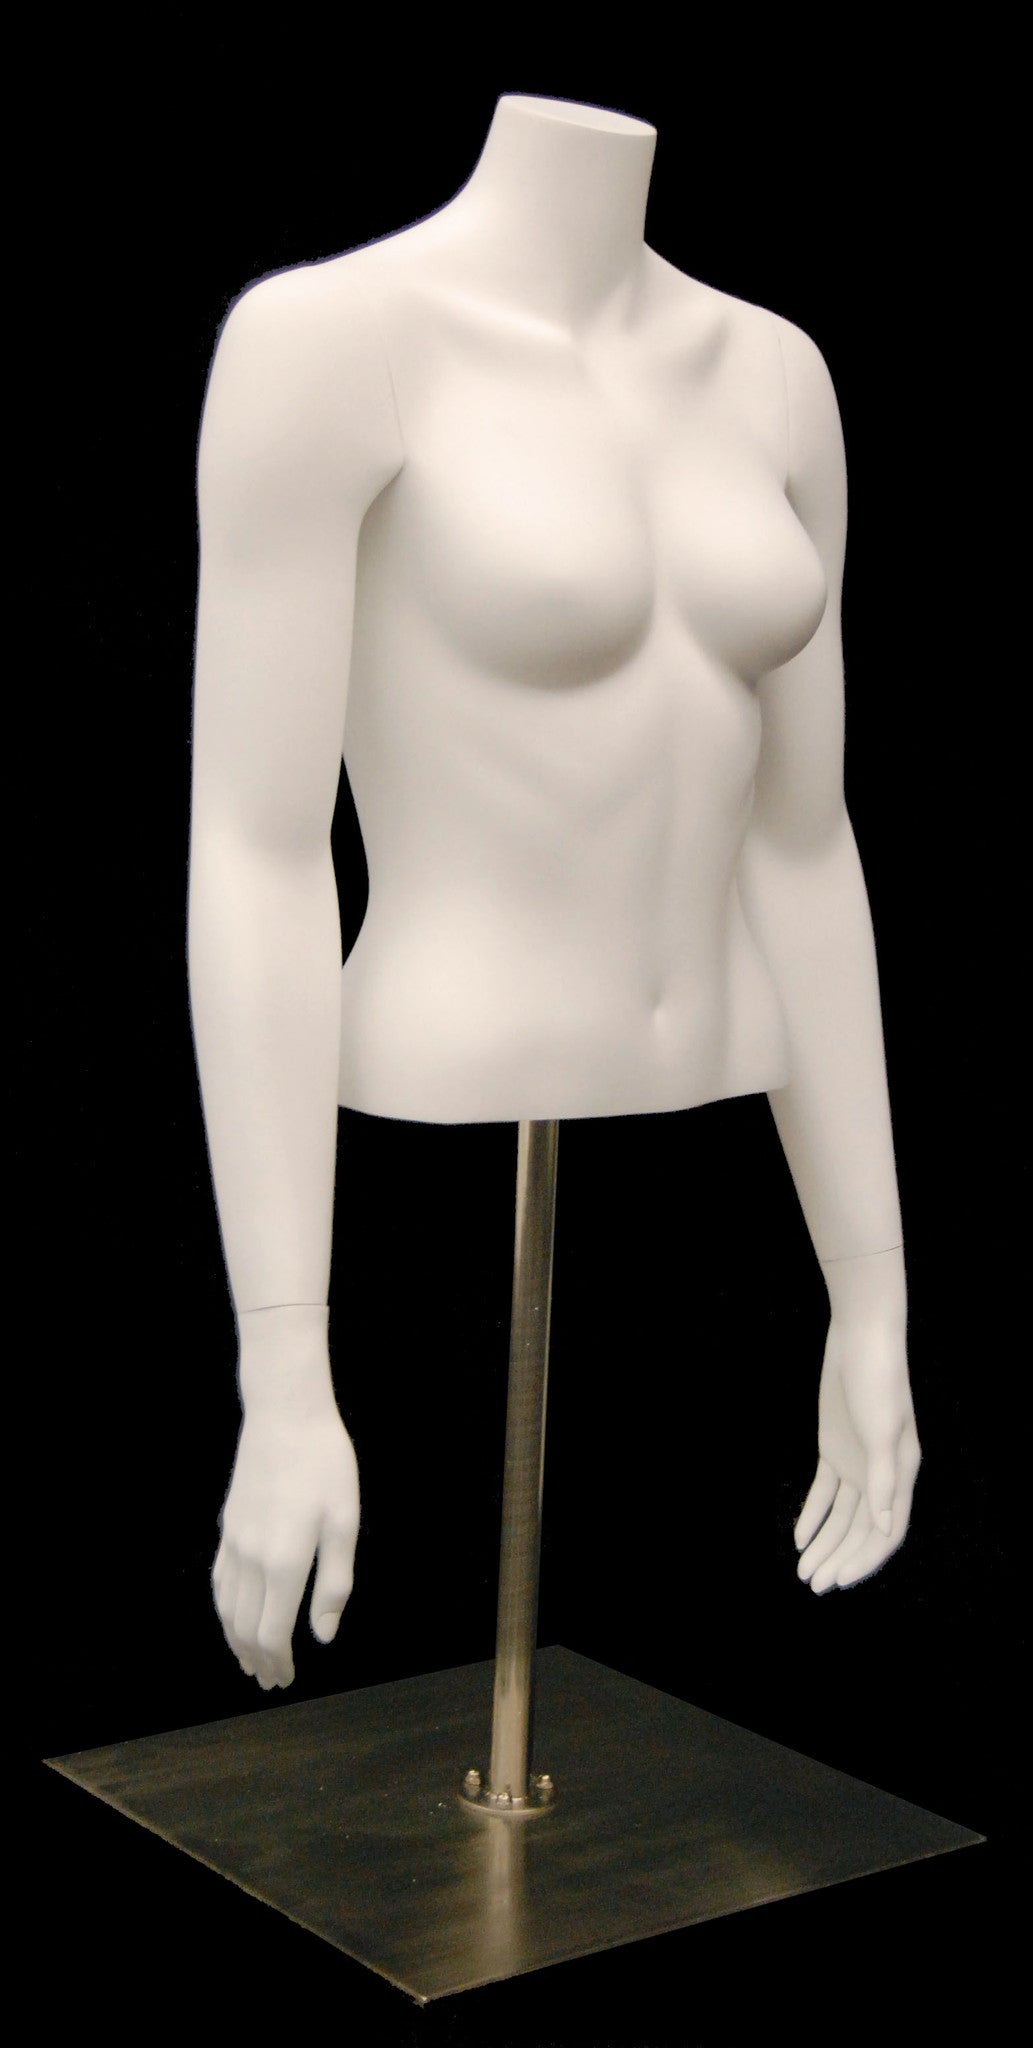 Female Half-Body Torso on Stand with Arms: Matte White